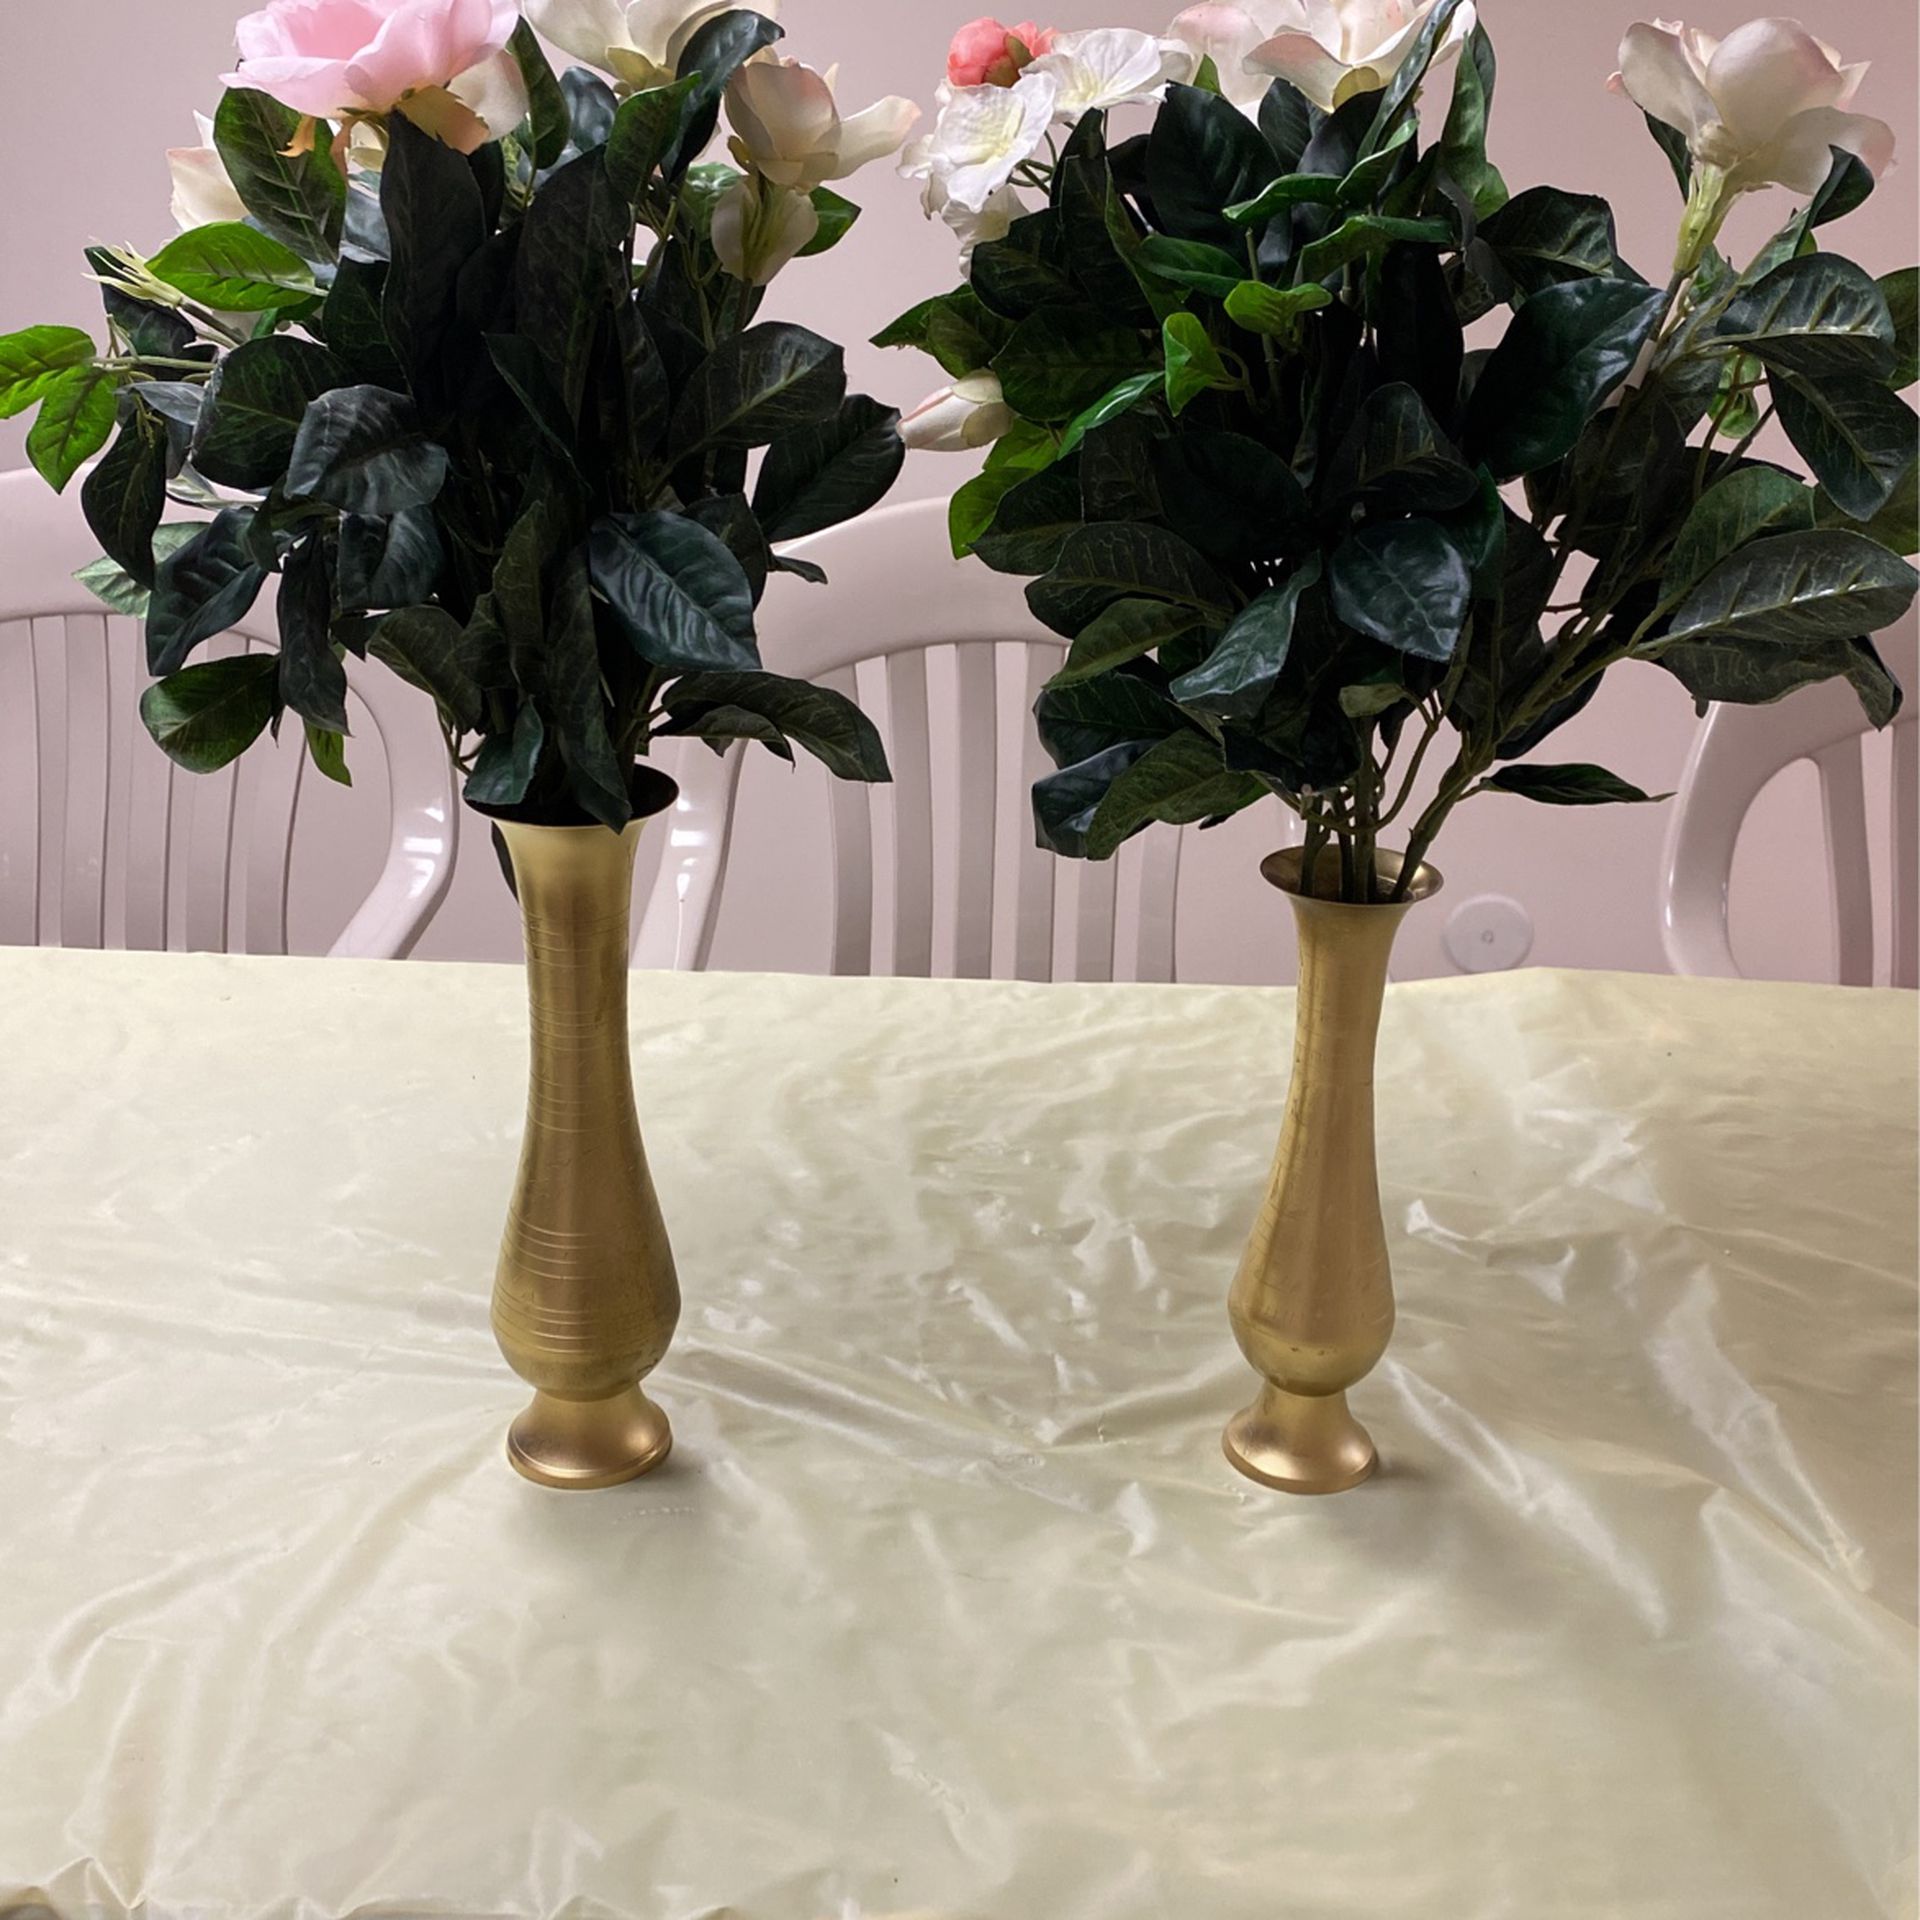 Two Gold Finish Metal Flower Vase With Free Flowers 